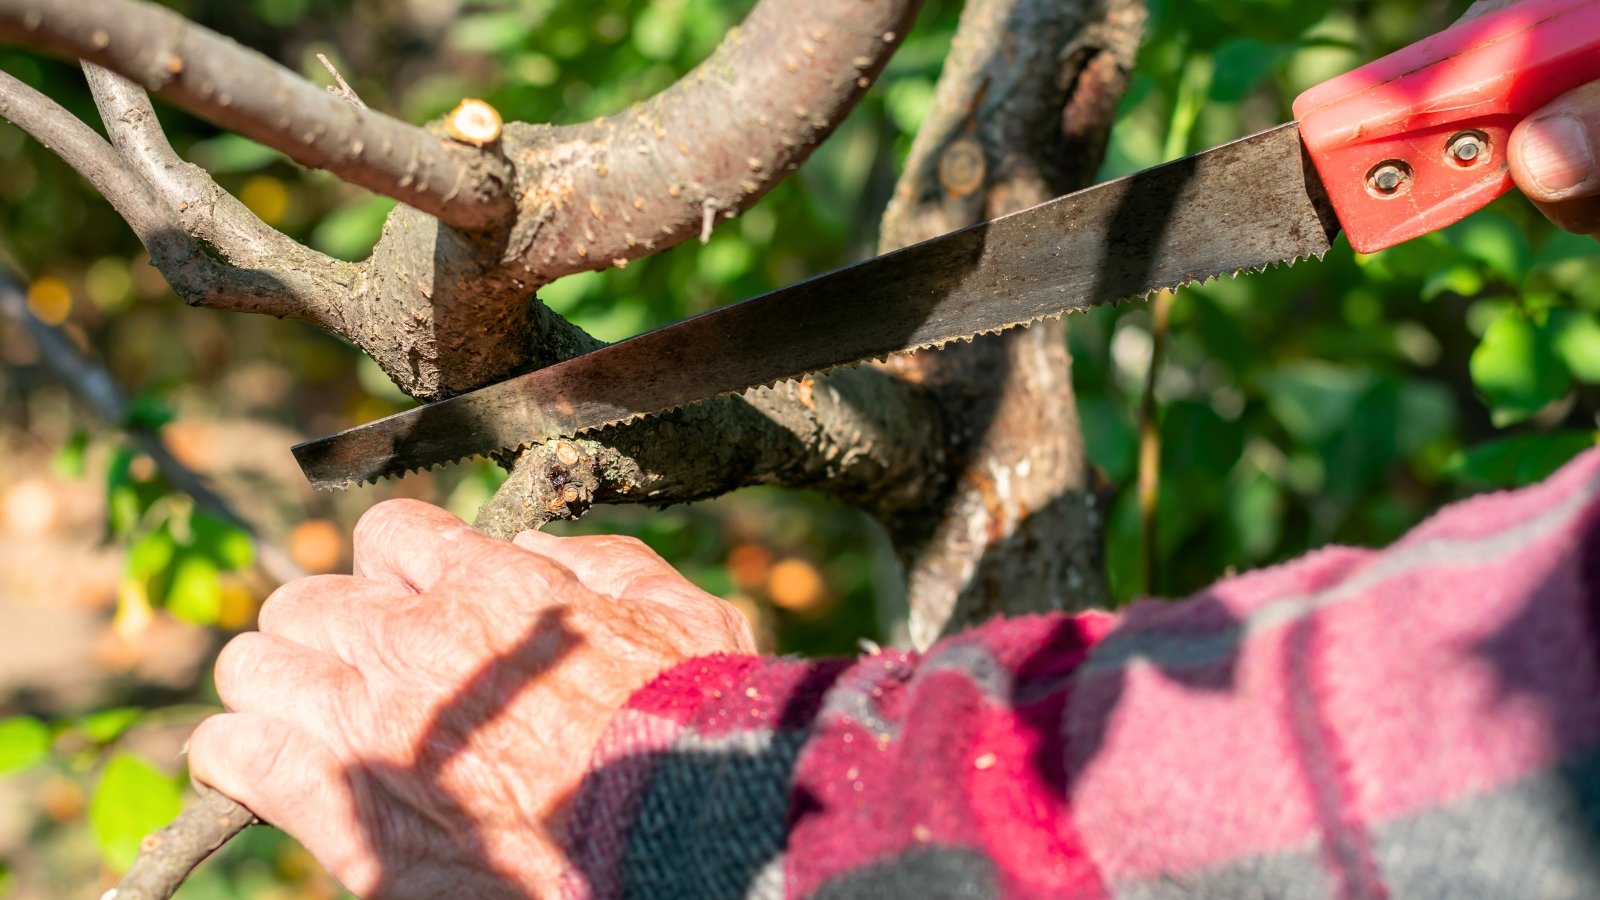 Close-up of a gardener in a plaid red shirt pruning the branches of a fruit tree using a pruning saw.